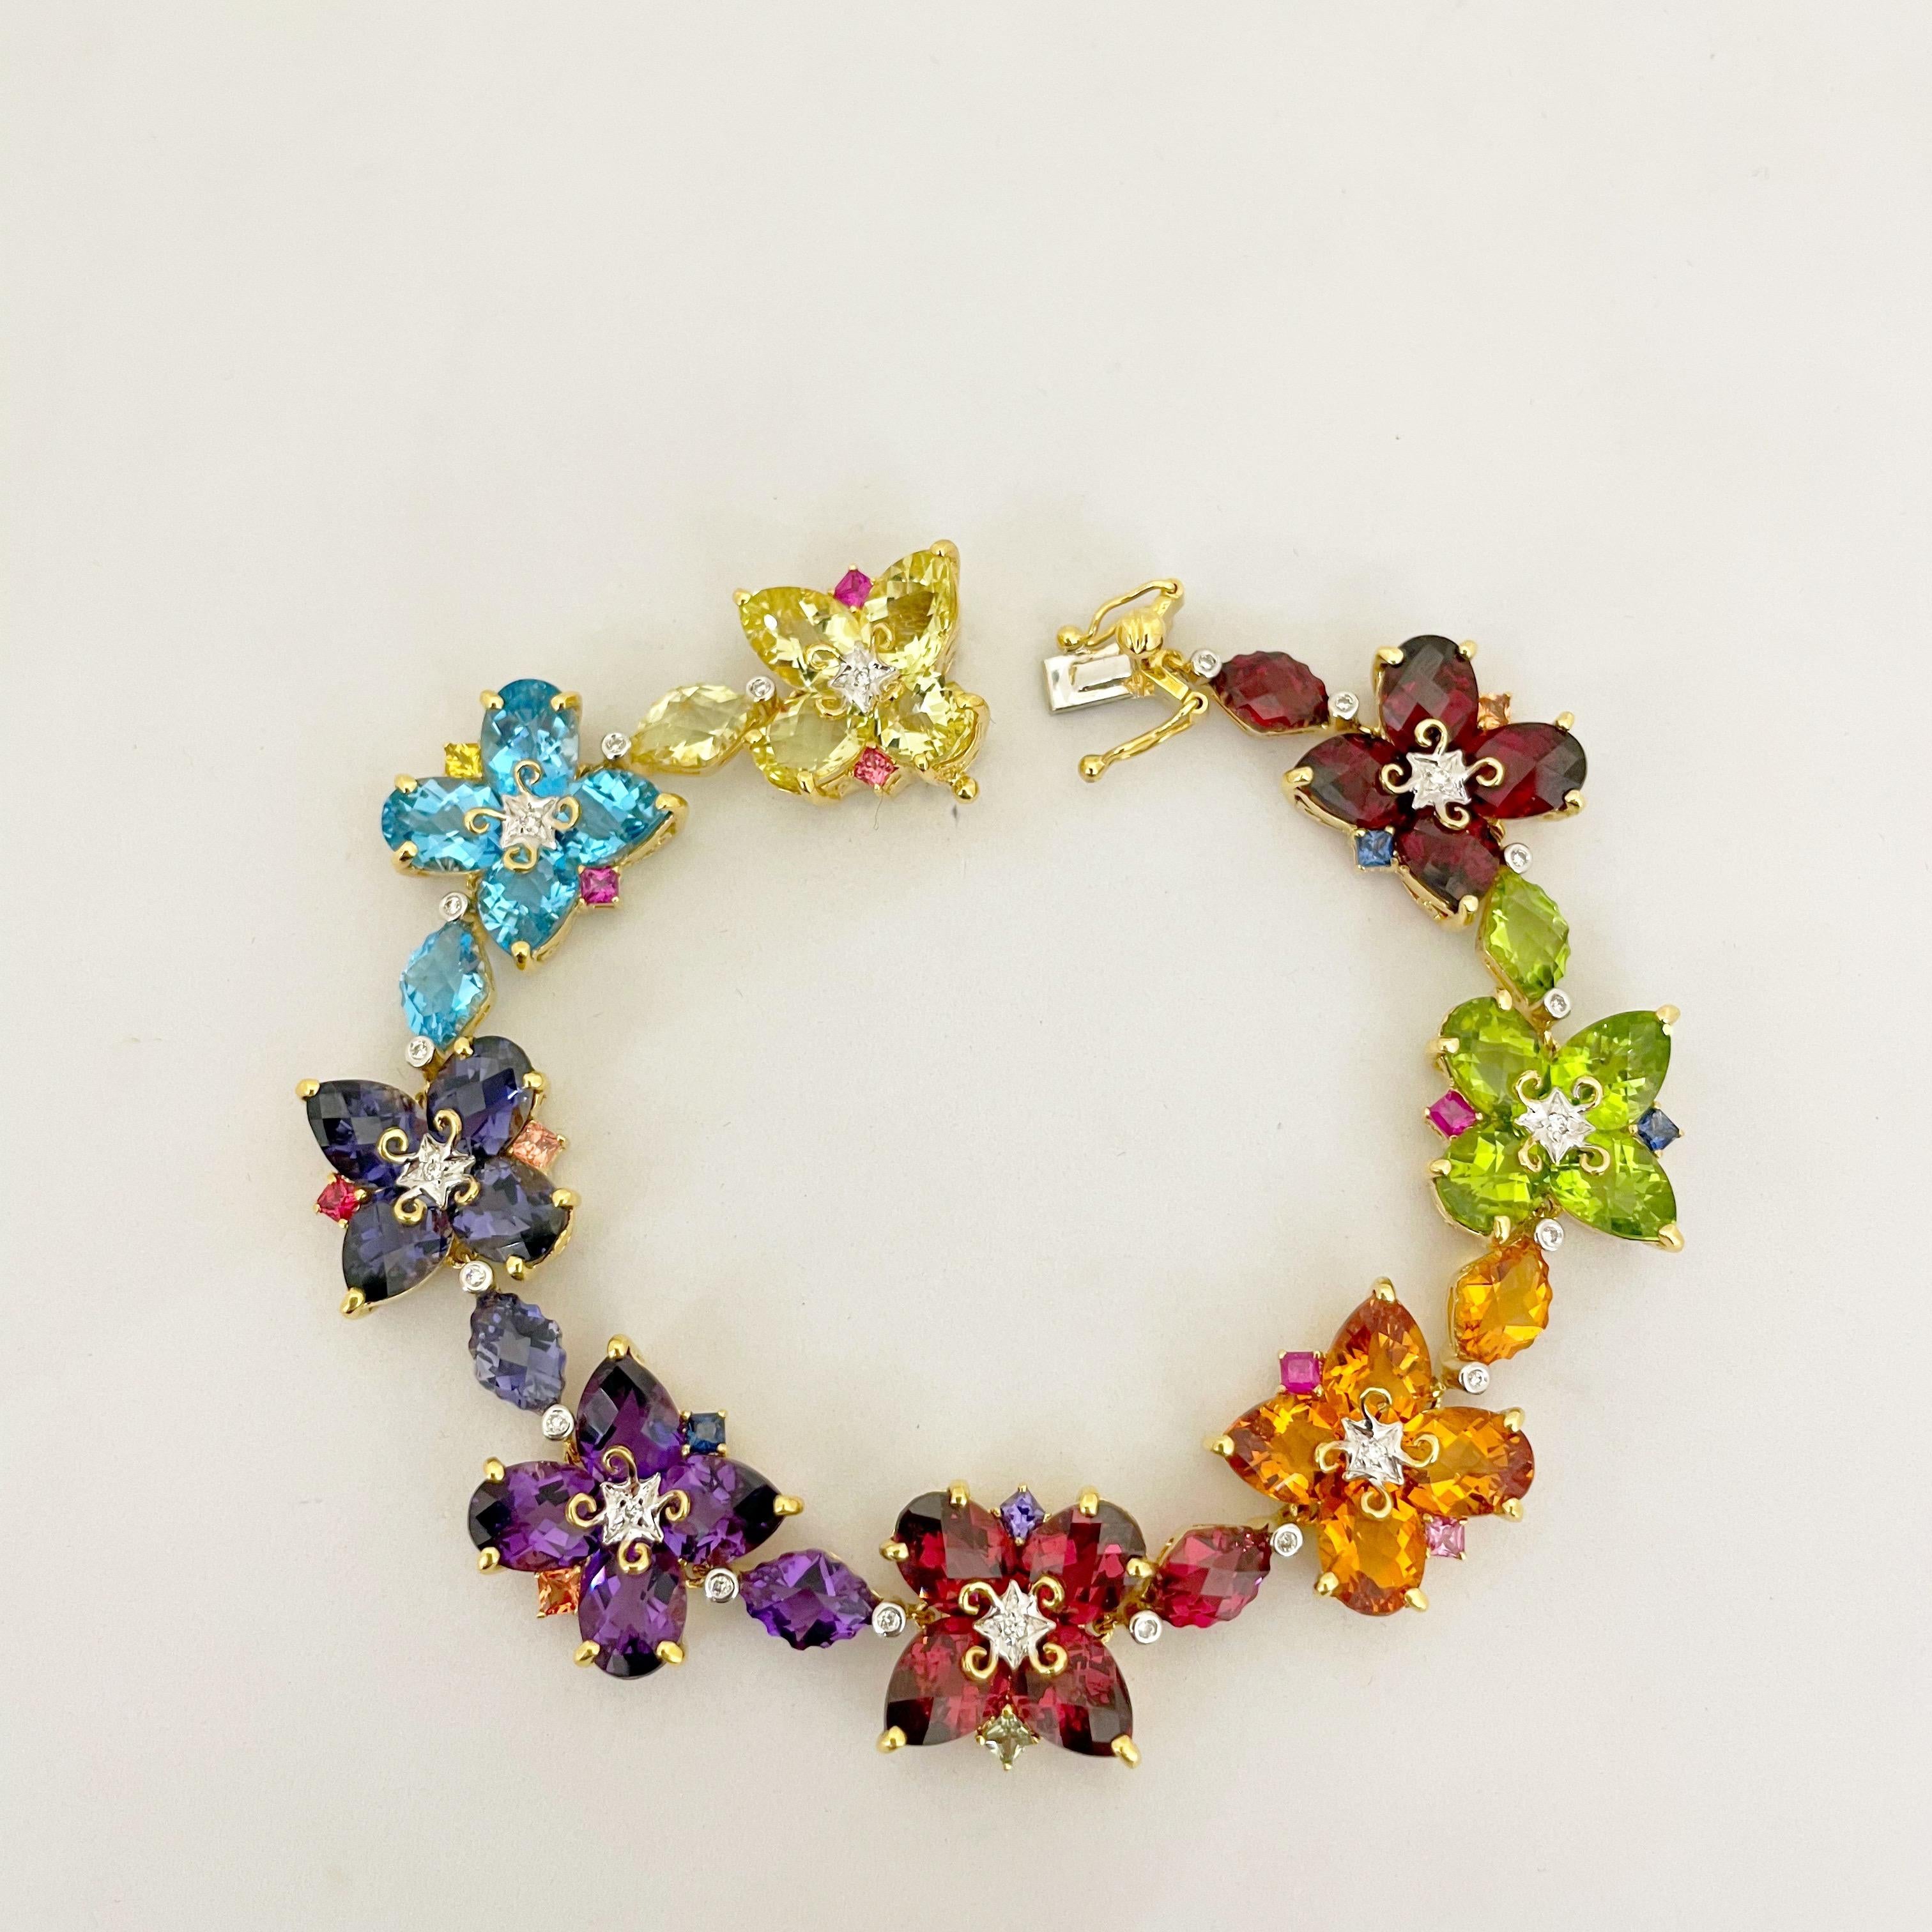 Brighten your day with this colorful semi precious stone bracelet. Eight sections set with lemon quartz, blue topaz, iolite amethyst, pink tourmaline, citrine, peridot and garnet. The sections are designed with 2 oval and 2 pear shaped stones giving